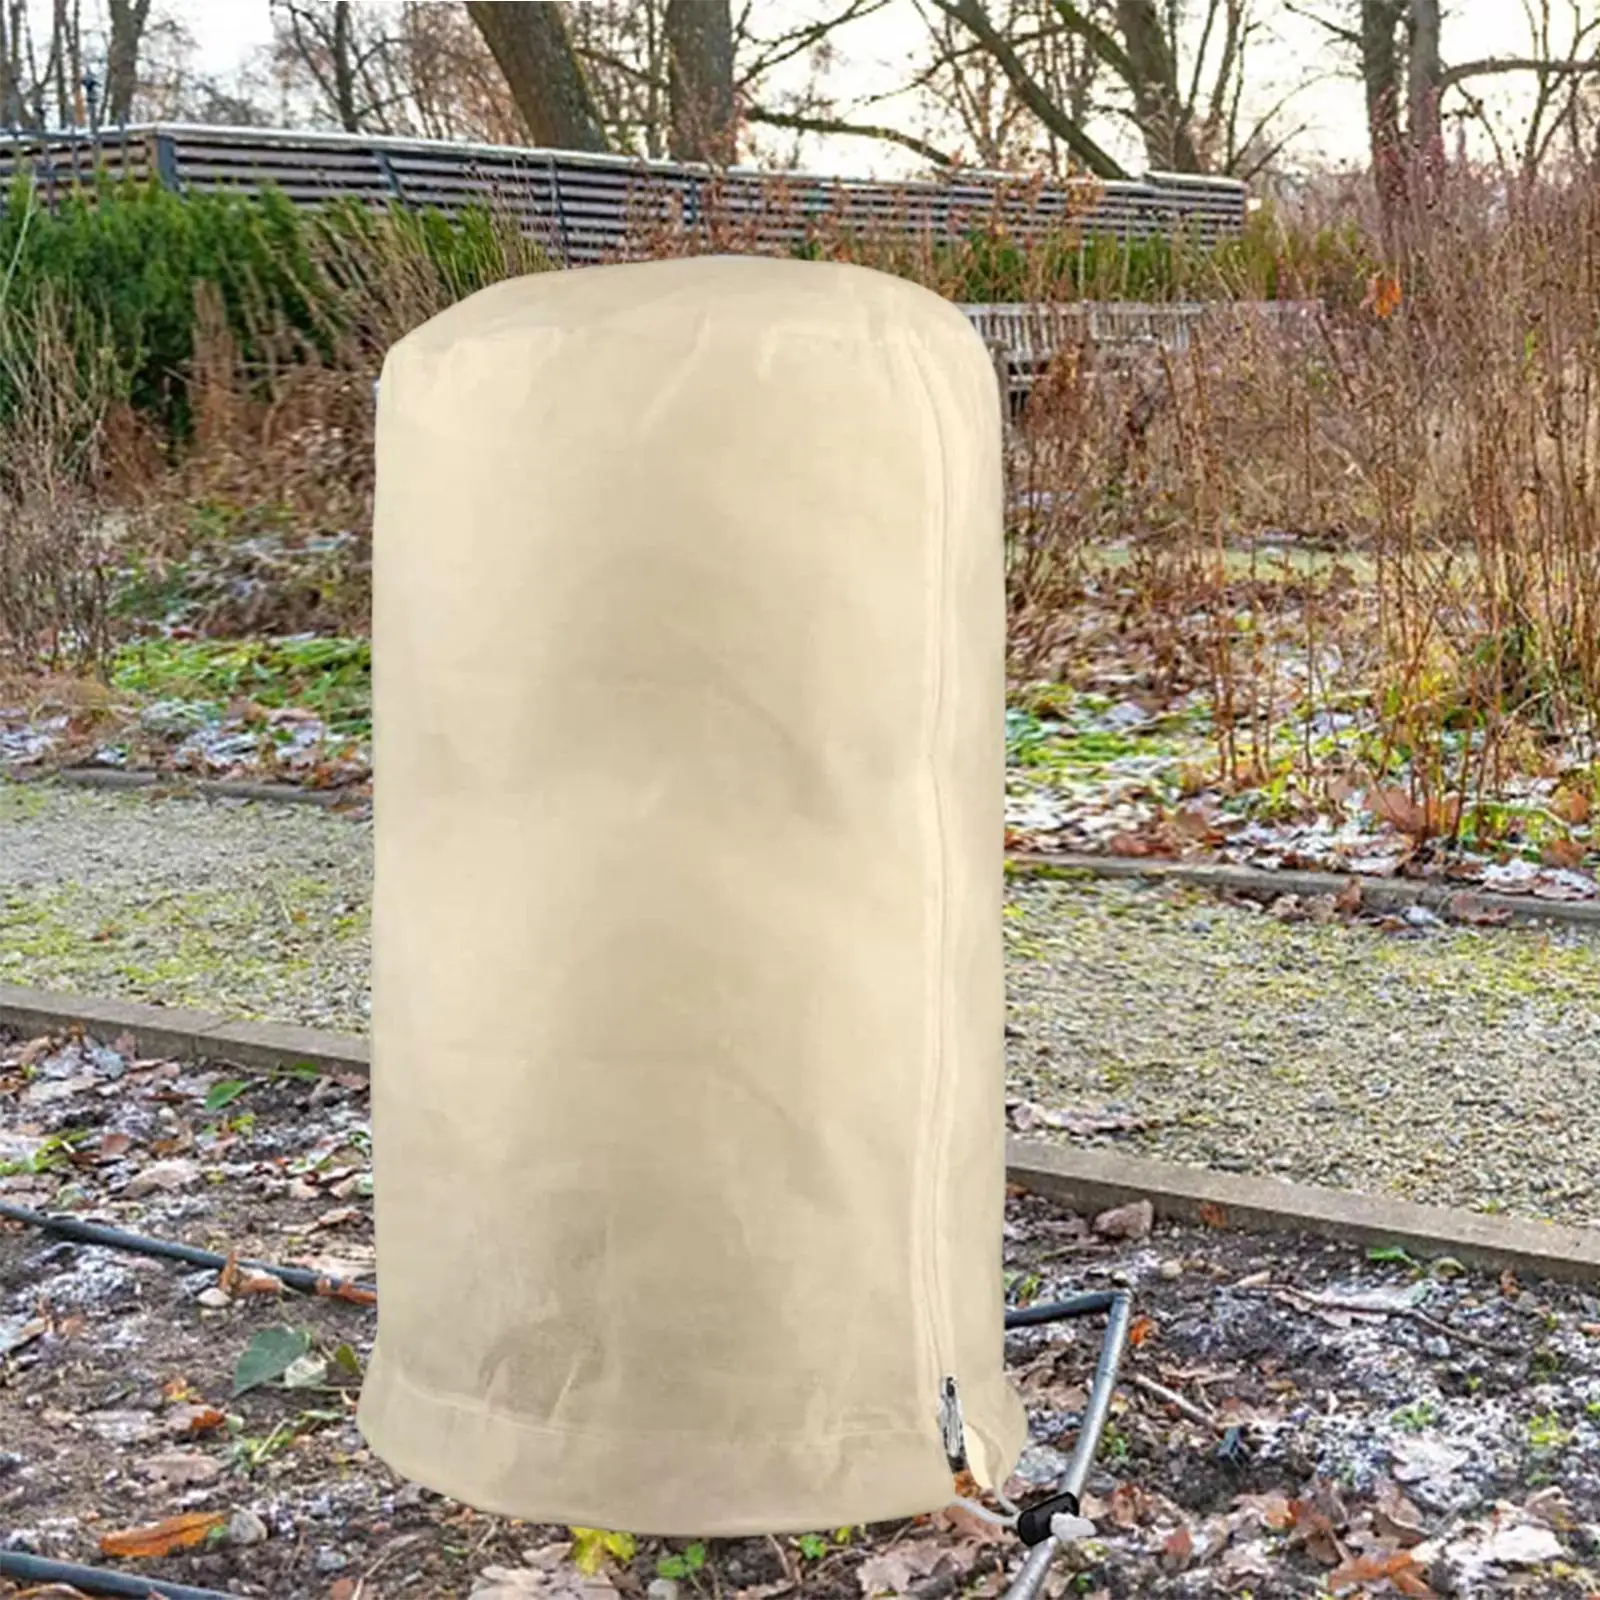 Plant Cover Freeze Protection Winter Covering Reusable Protecting Bag Cold Frost Protection for Garden Shrub Rose